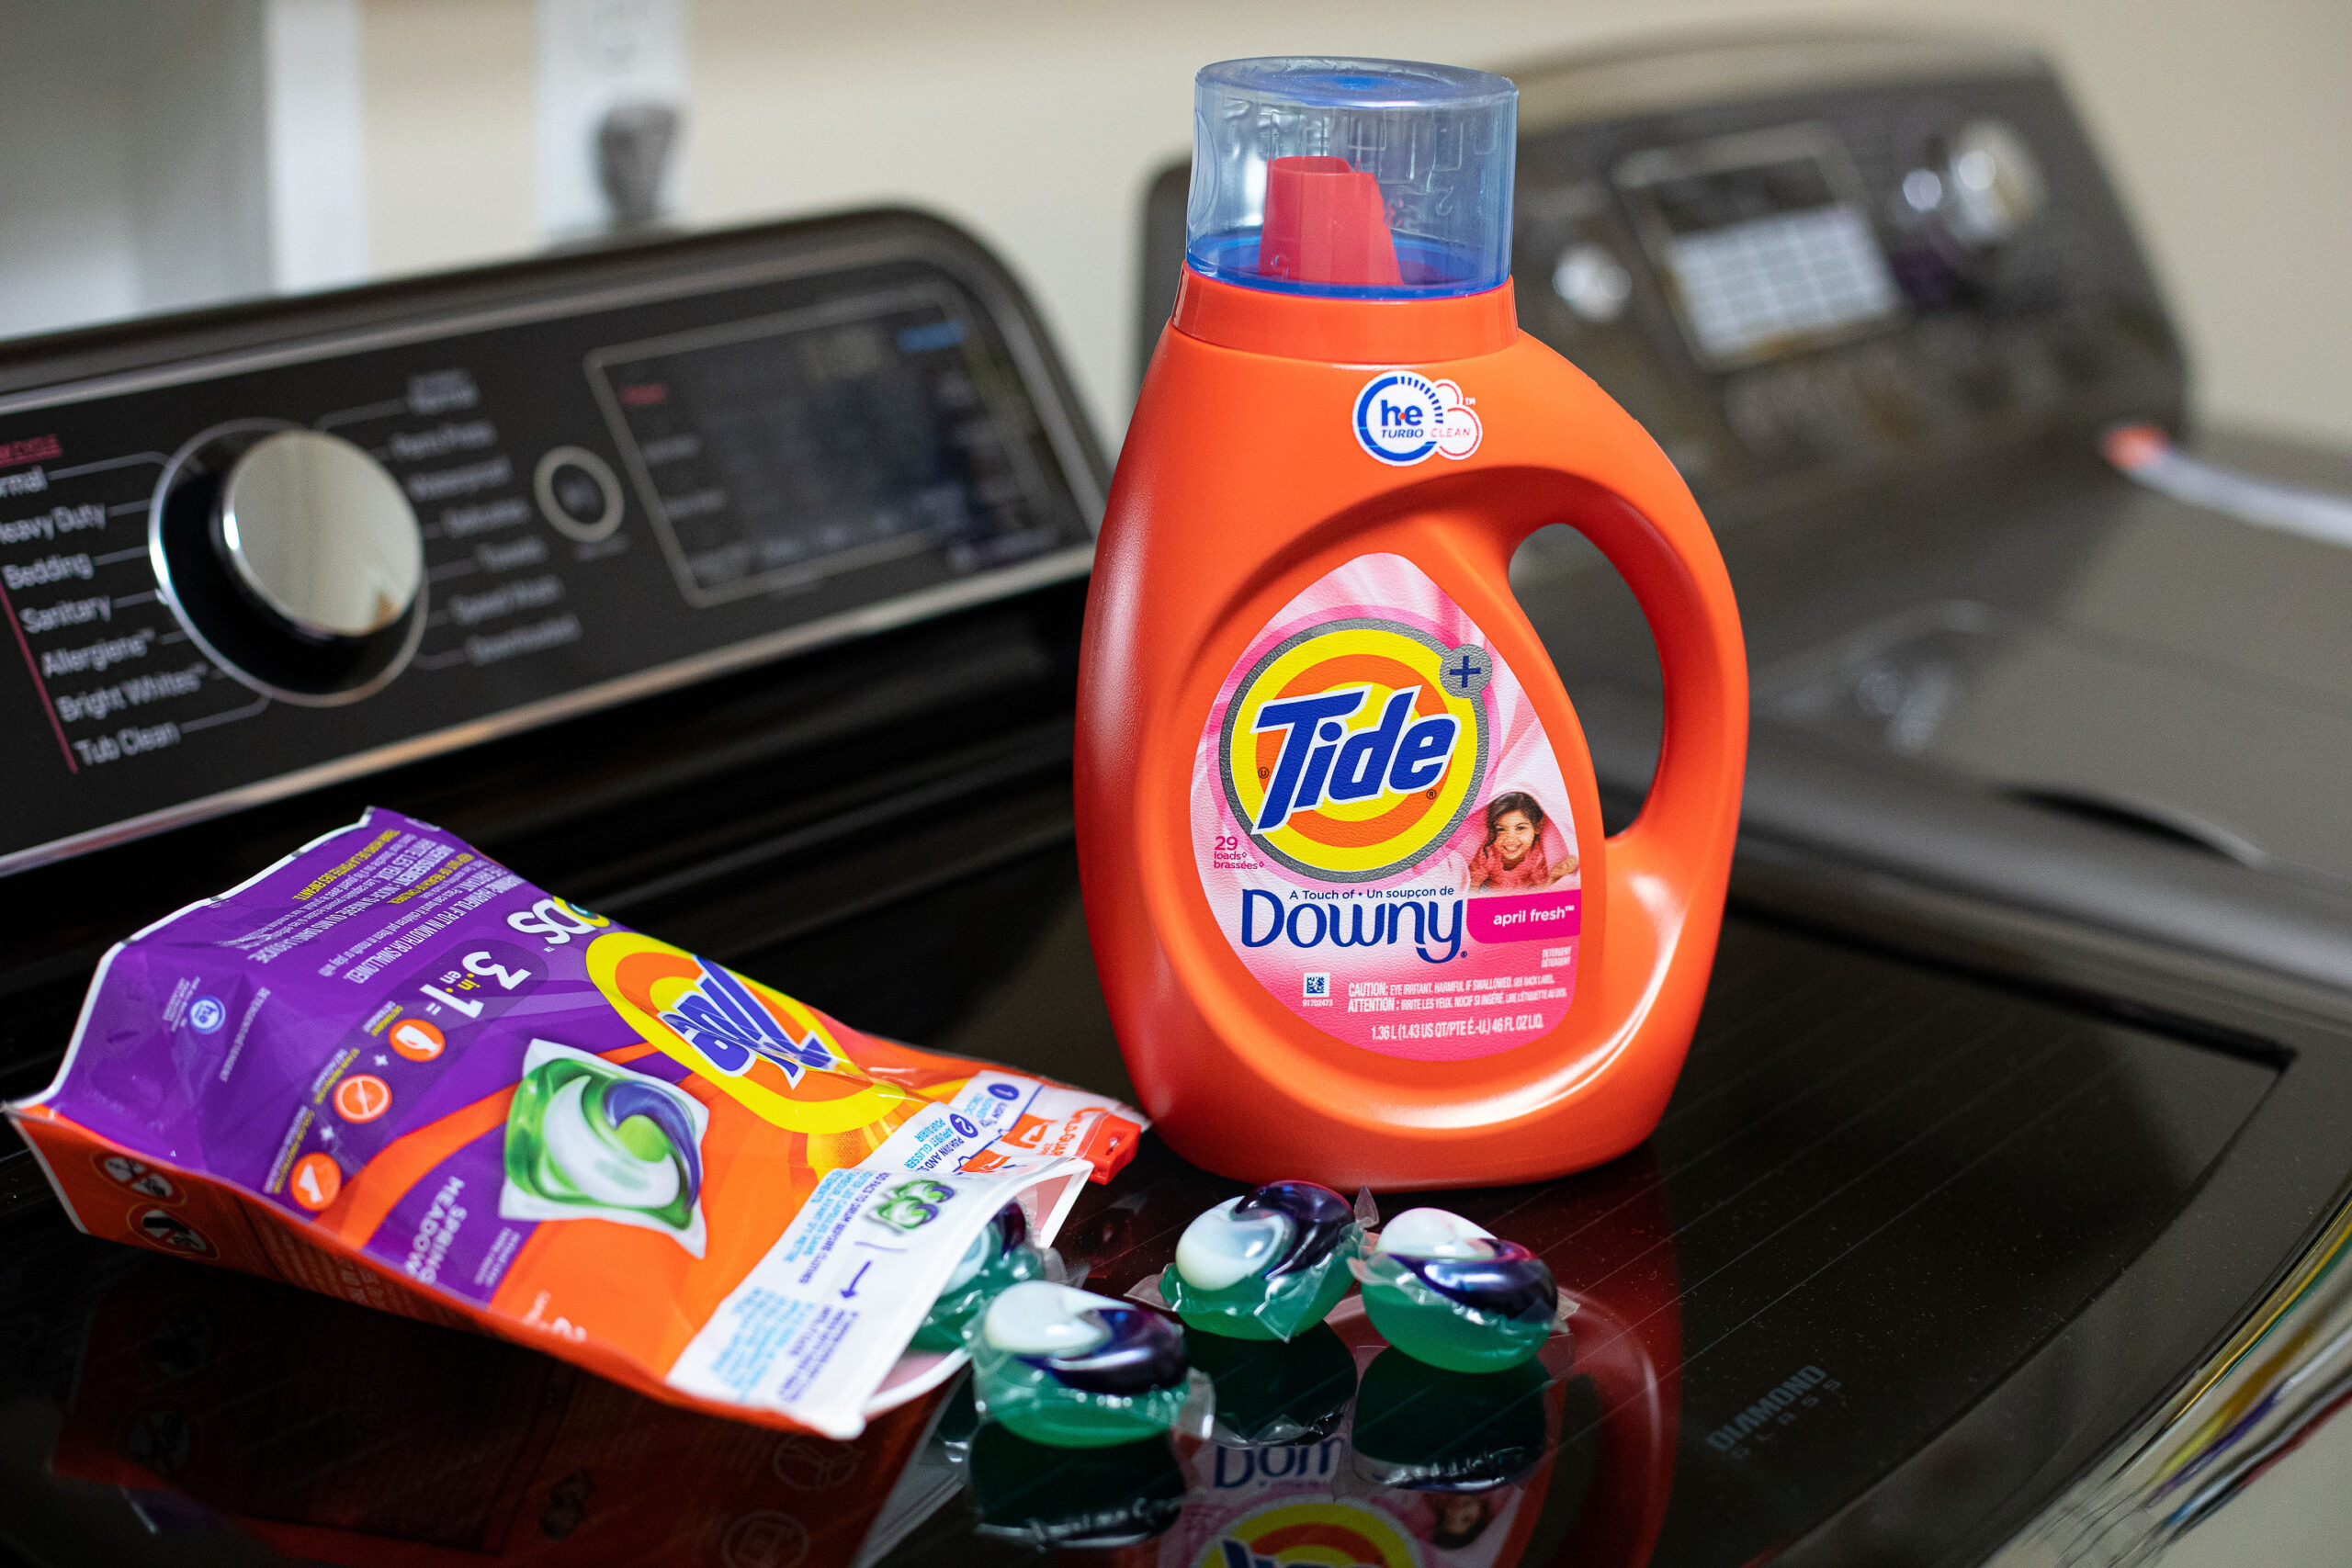 Get Tide Liquid For As Low As $3.99 At Kroger (Save $3.50!)